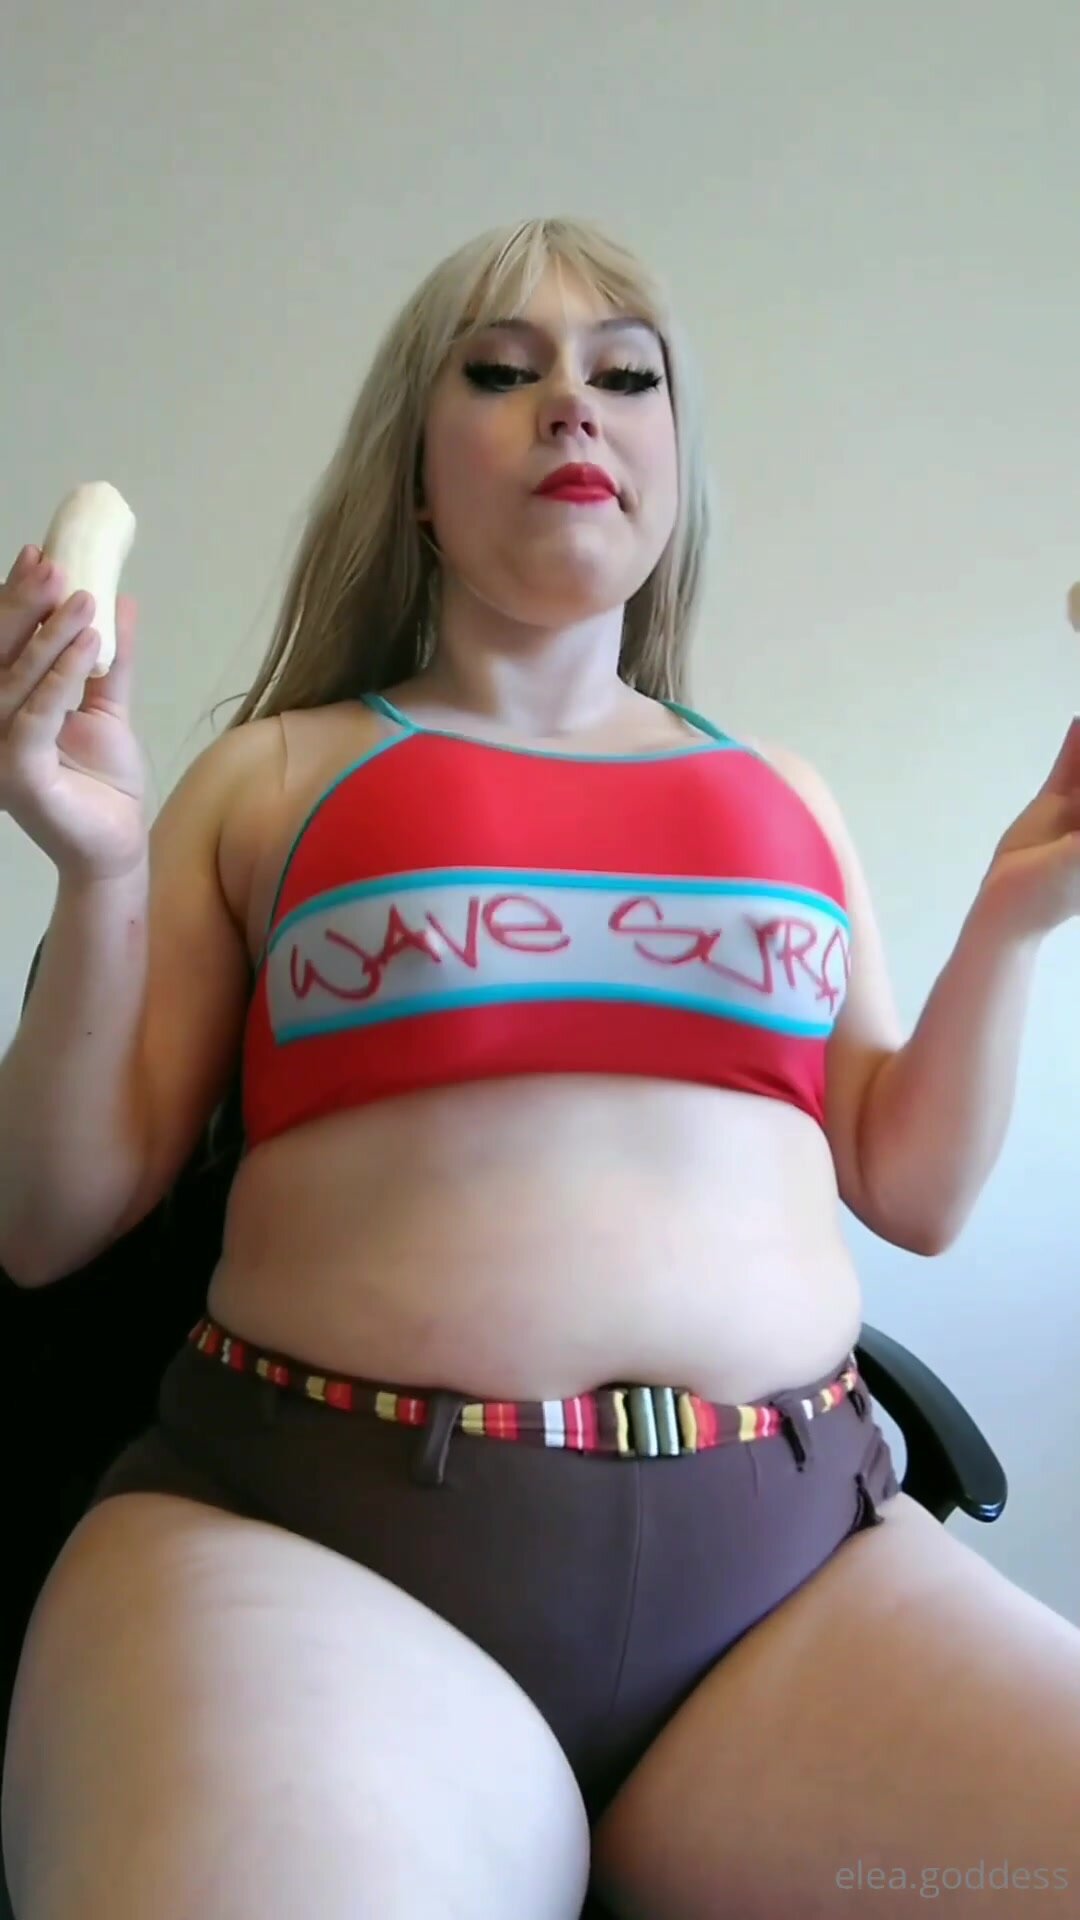 The girl inflates her stomach with soda